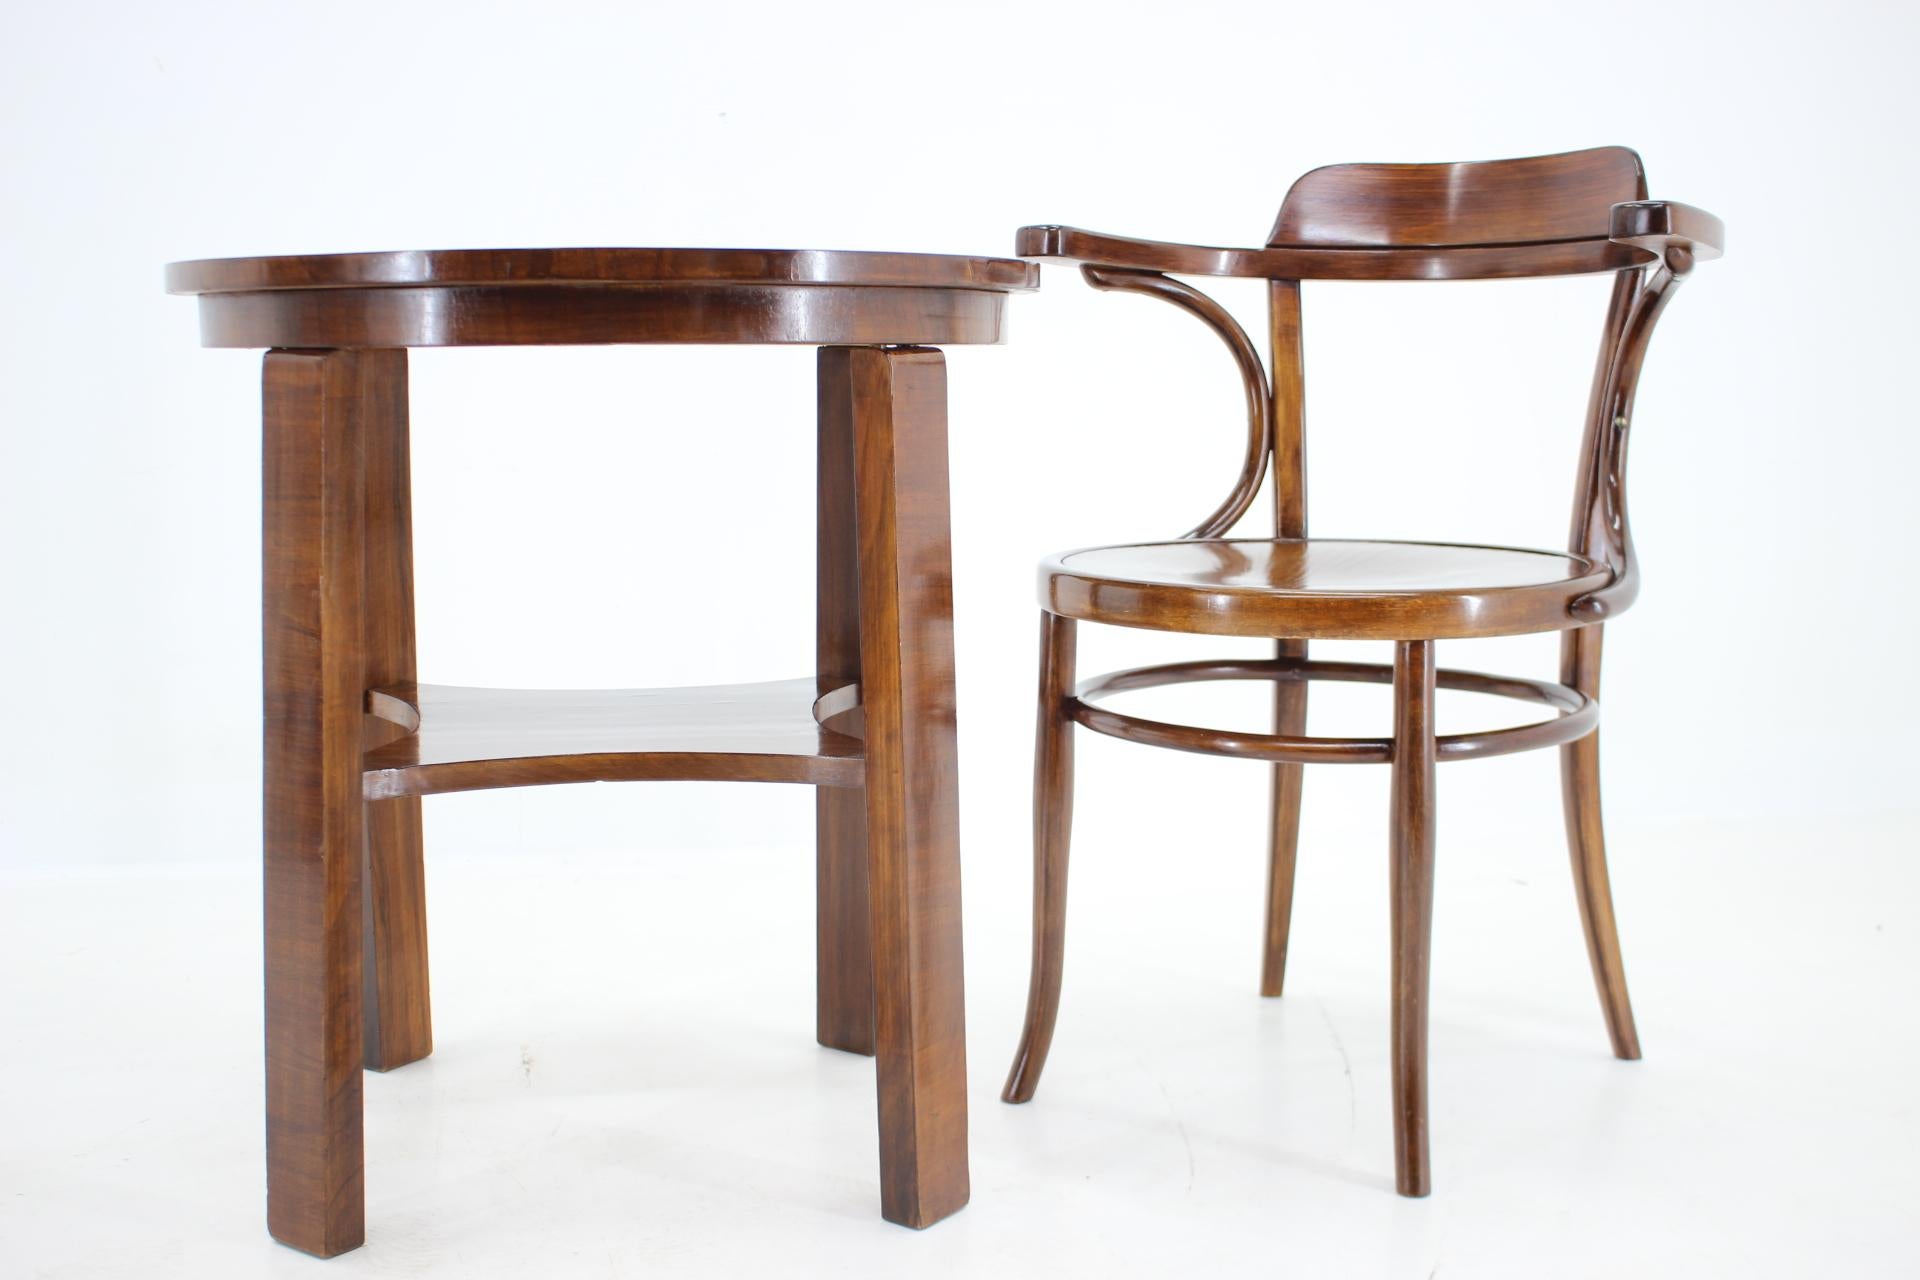 - Carefully refurbished and finished with shellac 
- Chair is labeled by producer 
- Table Diameter: 72 x 68.